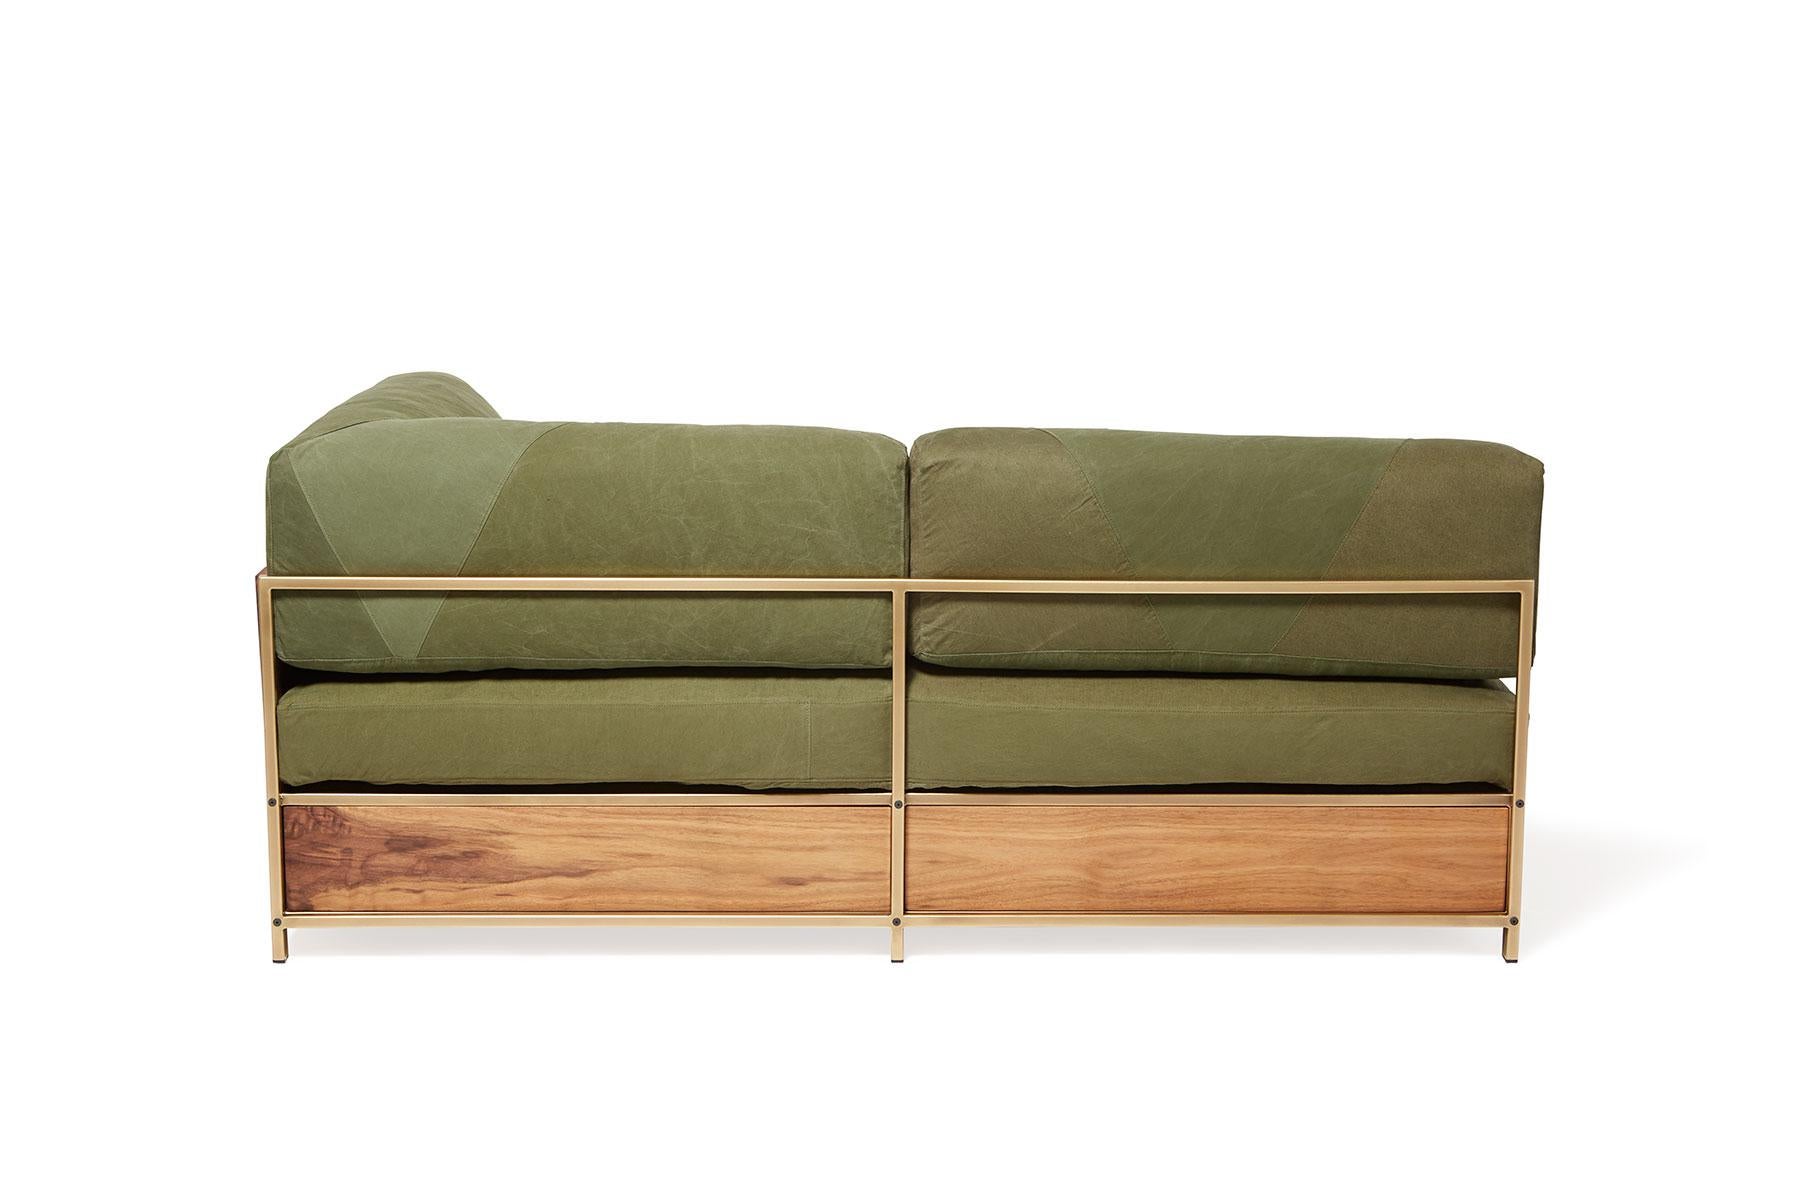 Vintage Military Canvas Guest Bed Sofa with Storage Drawers For Sale 1